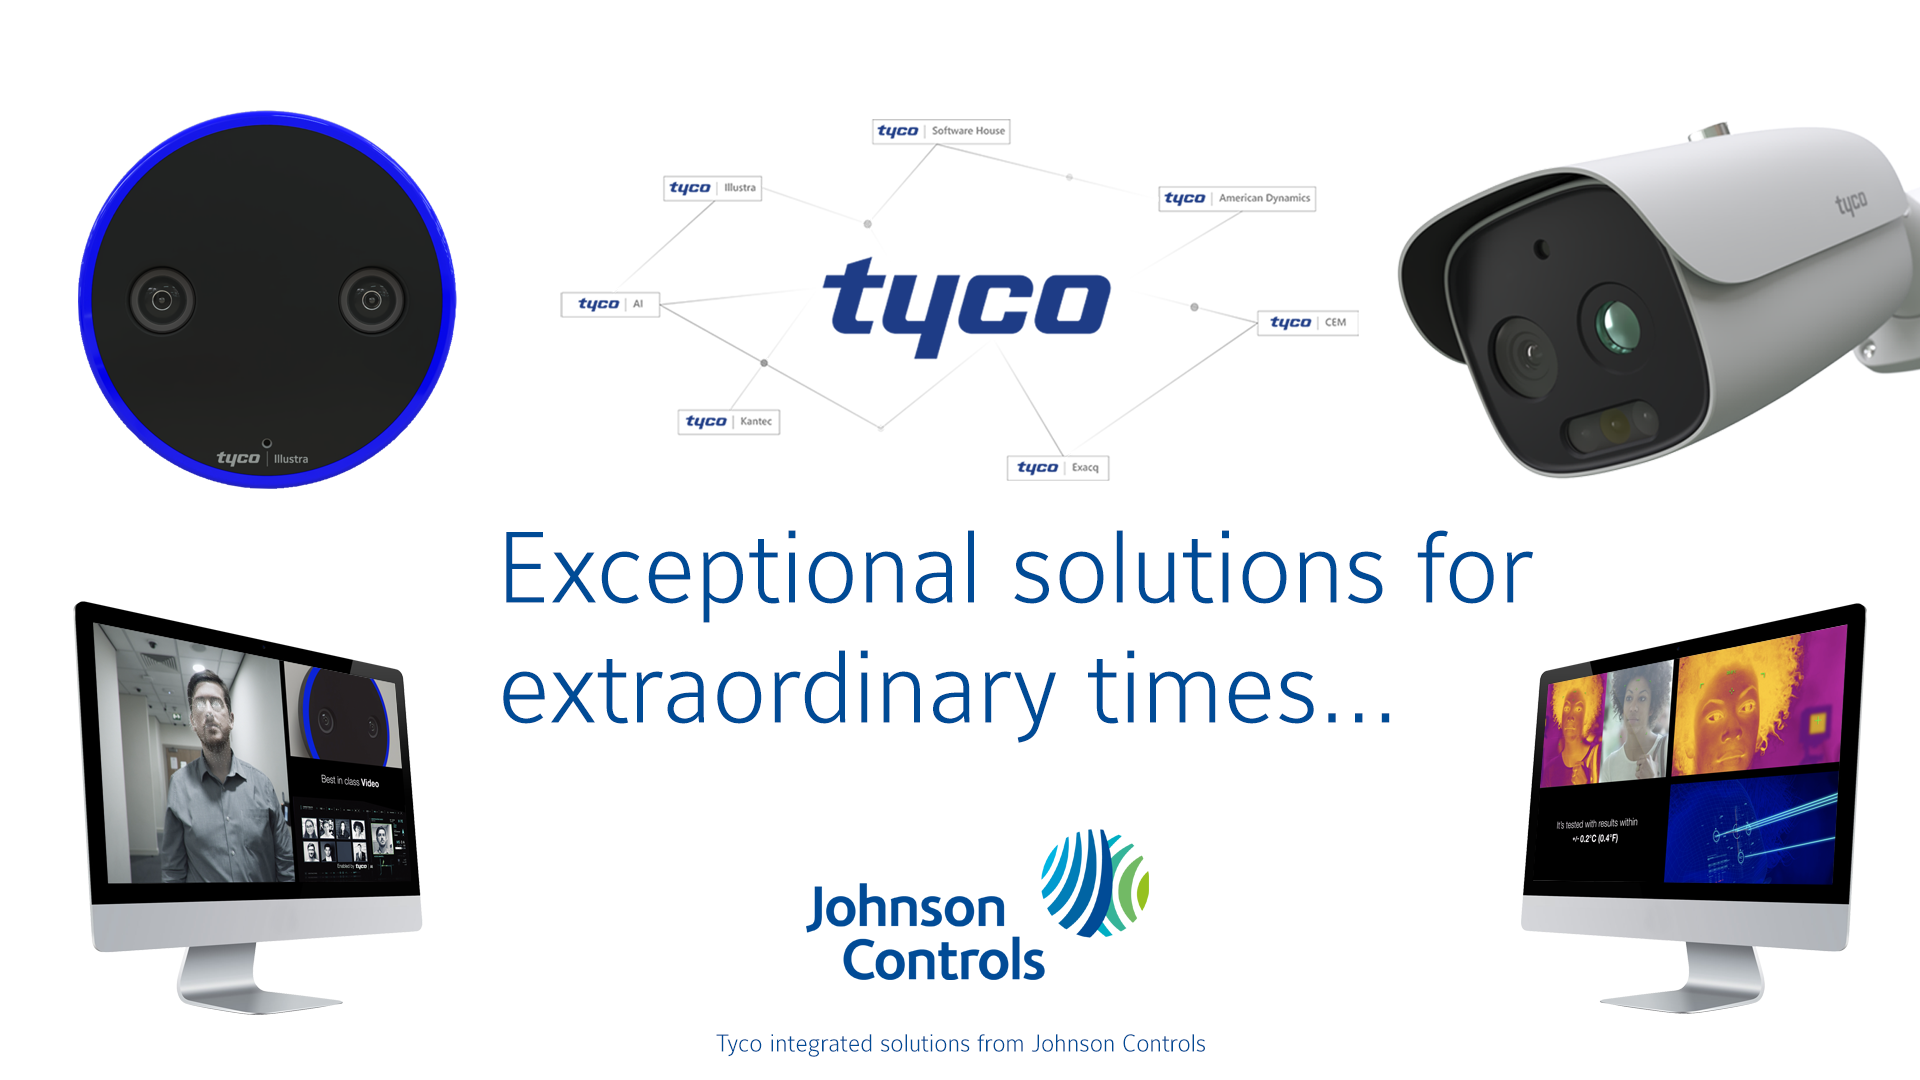 Tyco Exceptional 1